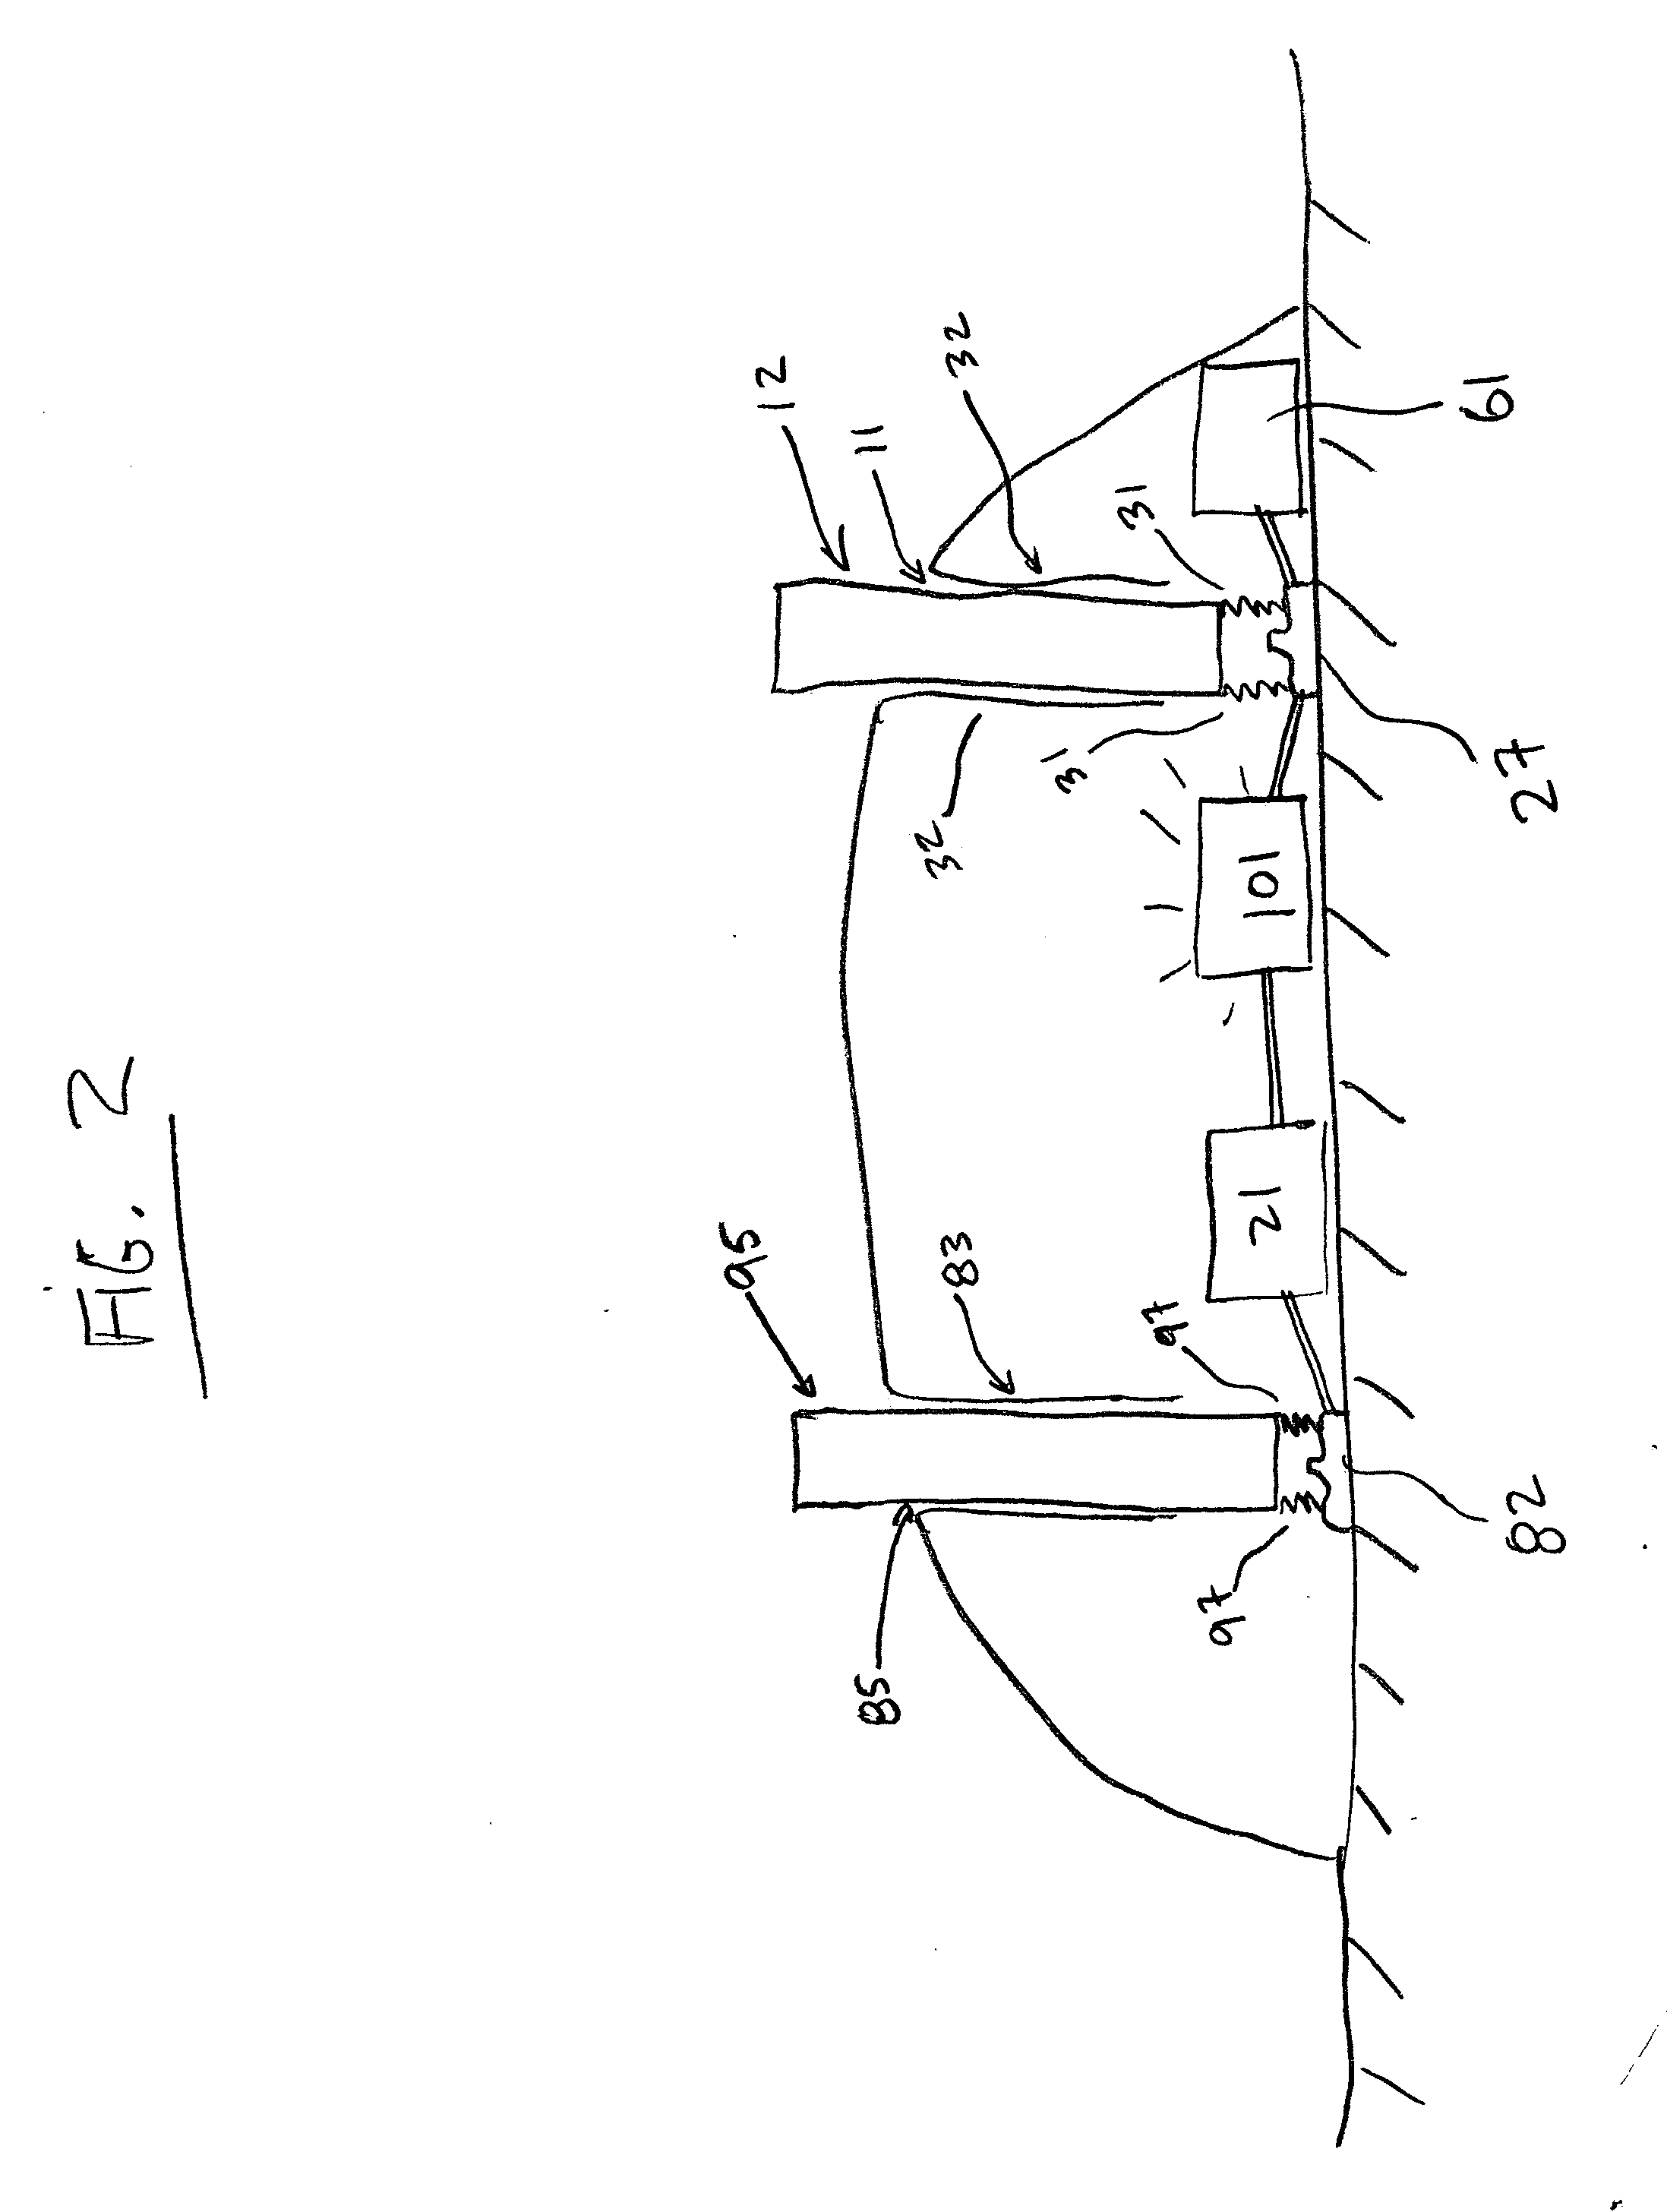 Apparatus that helps facilitate clean hands and teeth